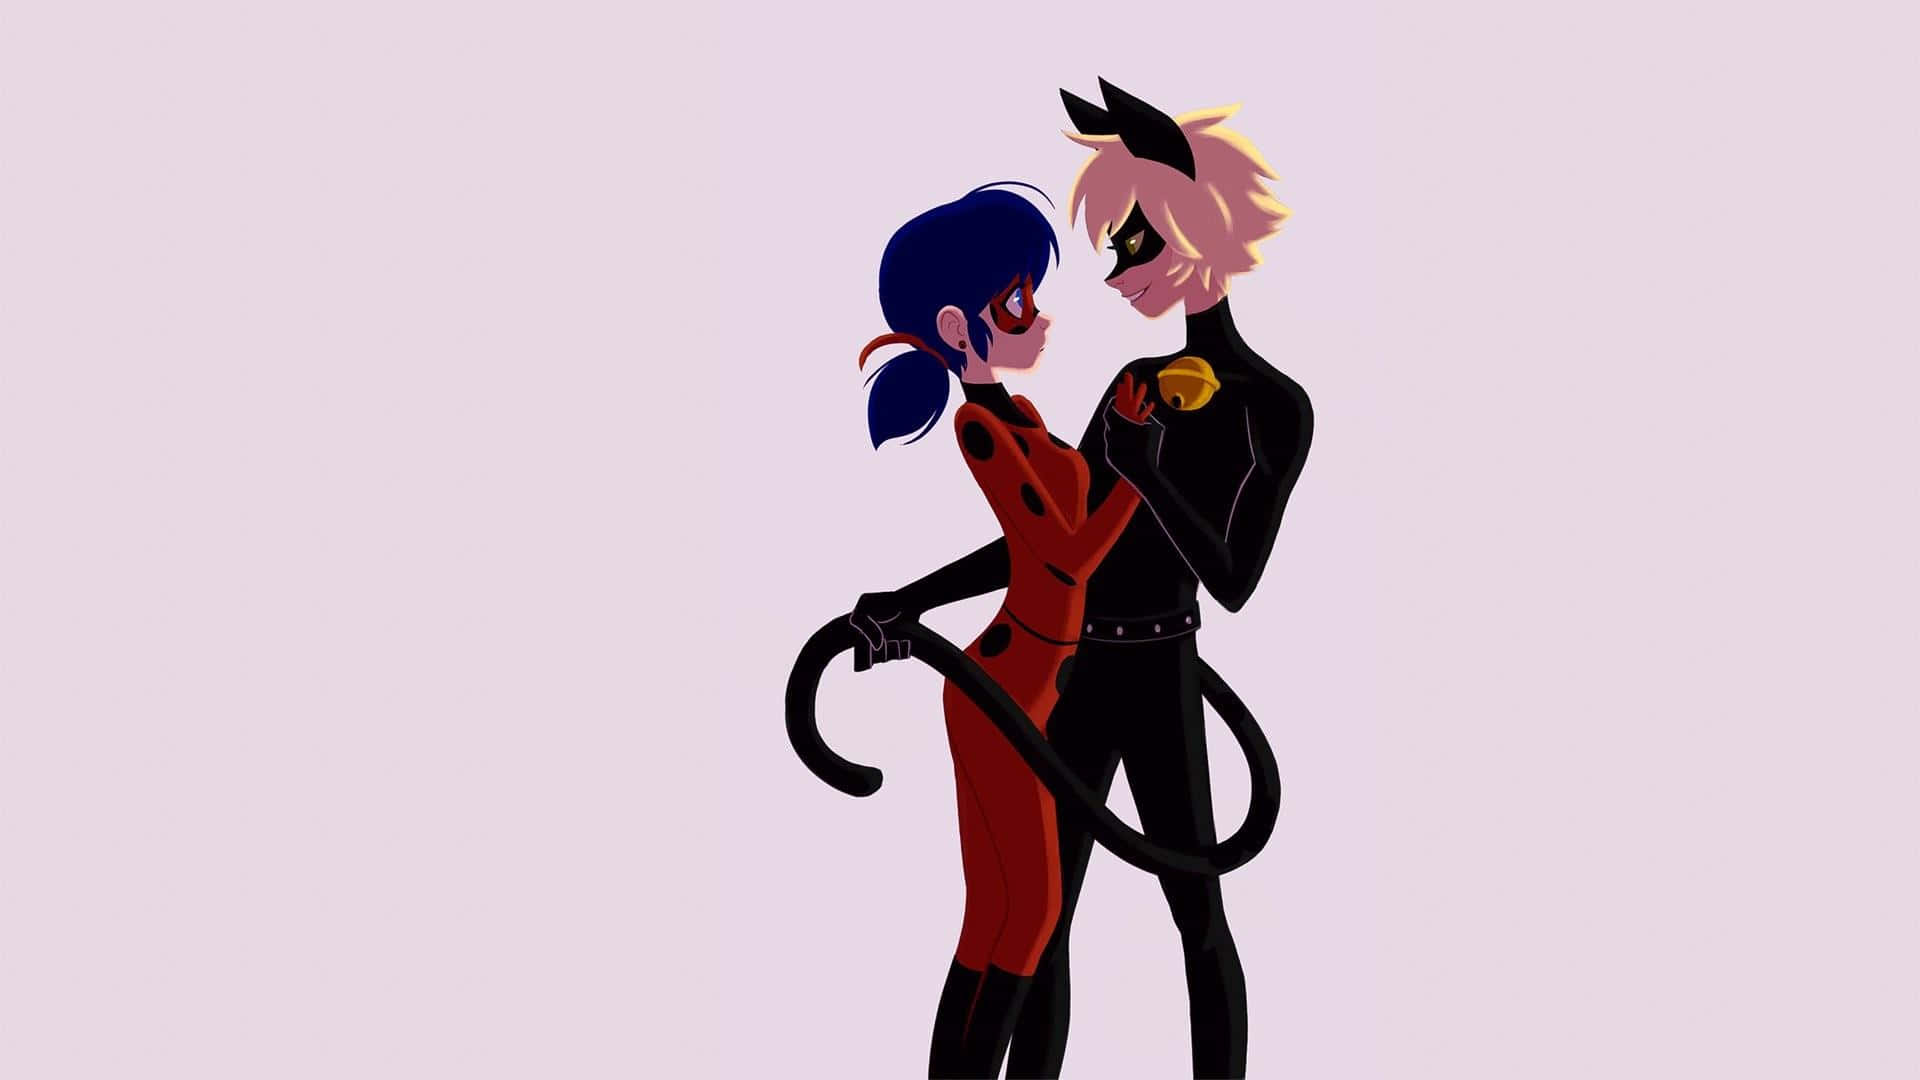 Join Ladybug and Cat Noir on their vigilante adventures!